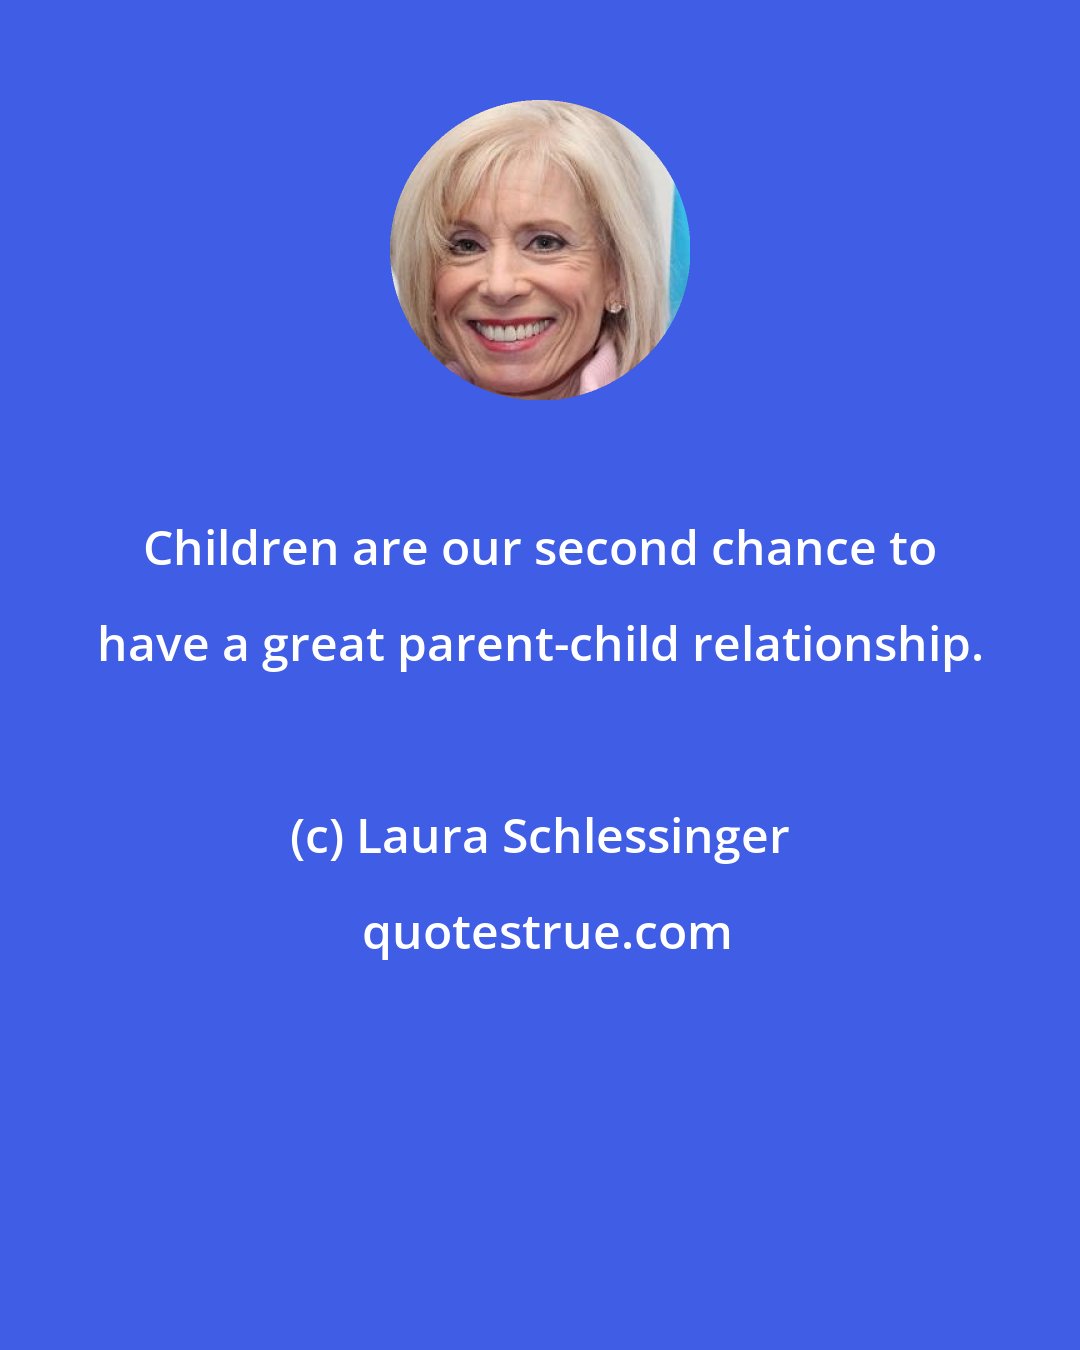 Laura Schlessinger: Children are our second chance to have a great parent-child relationship.